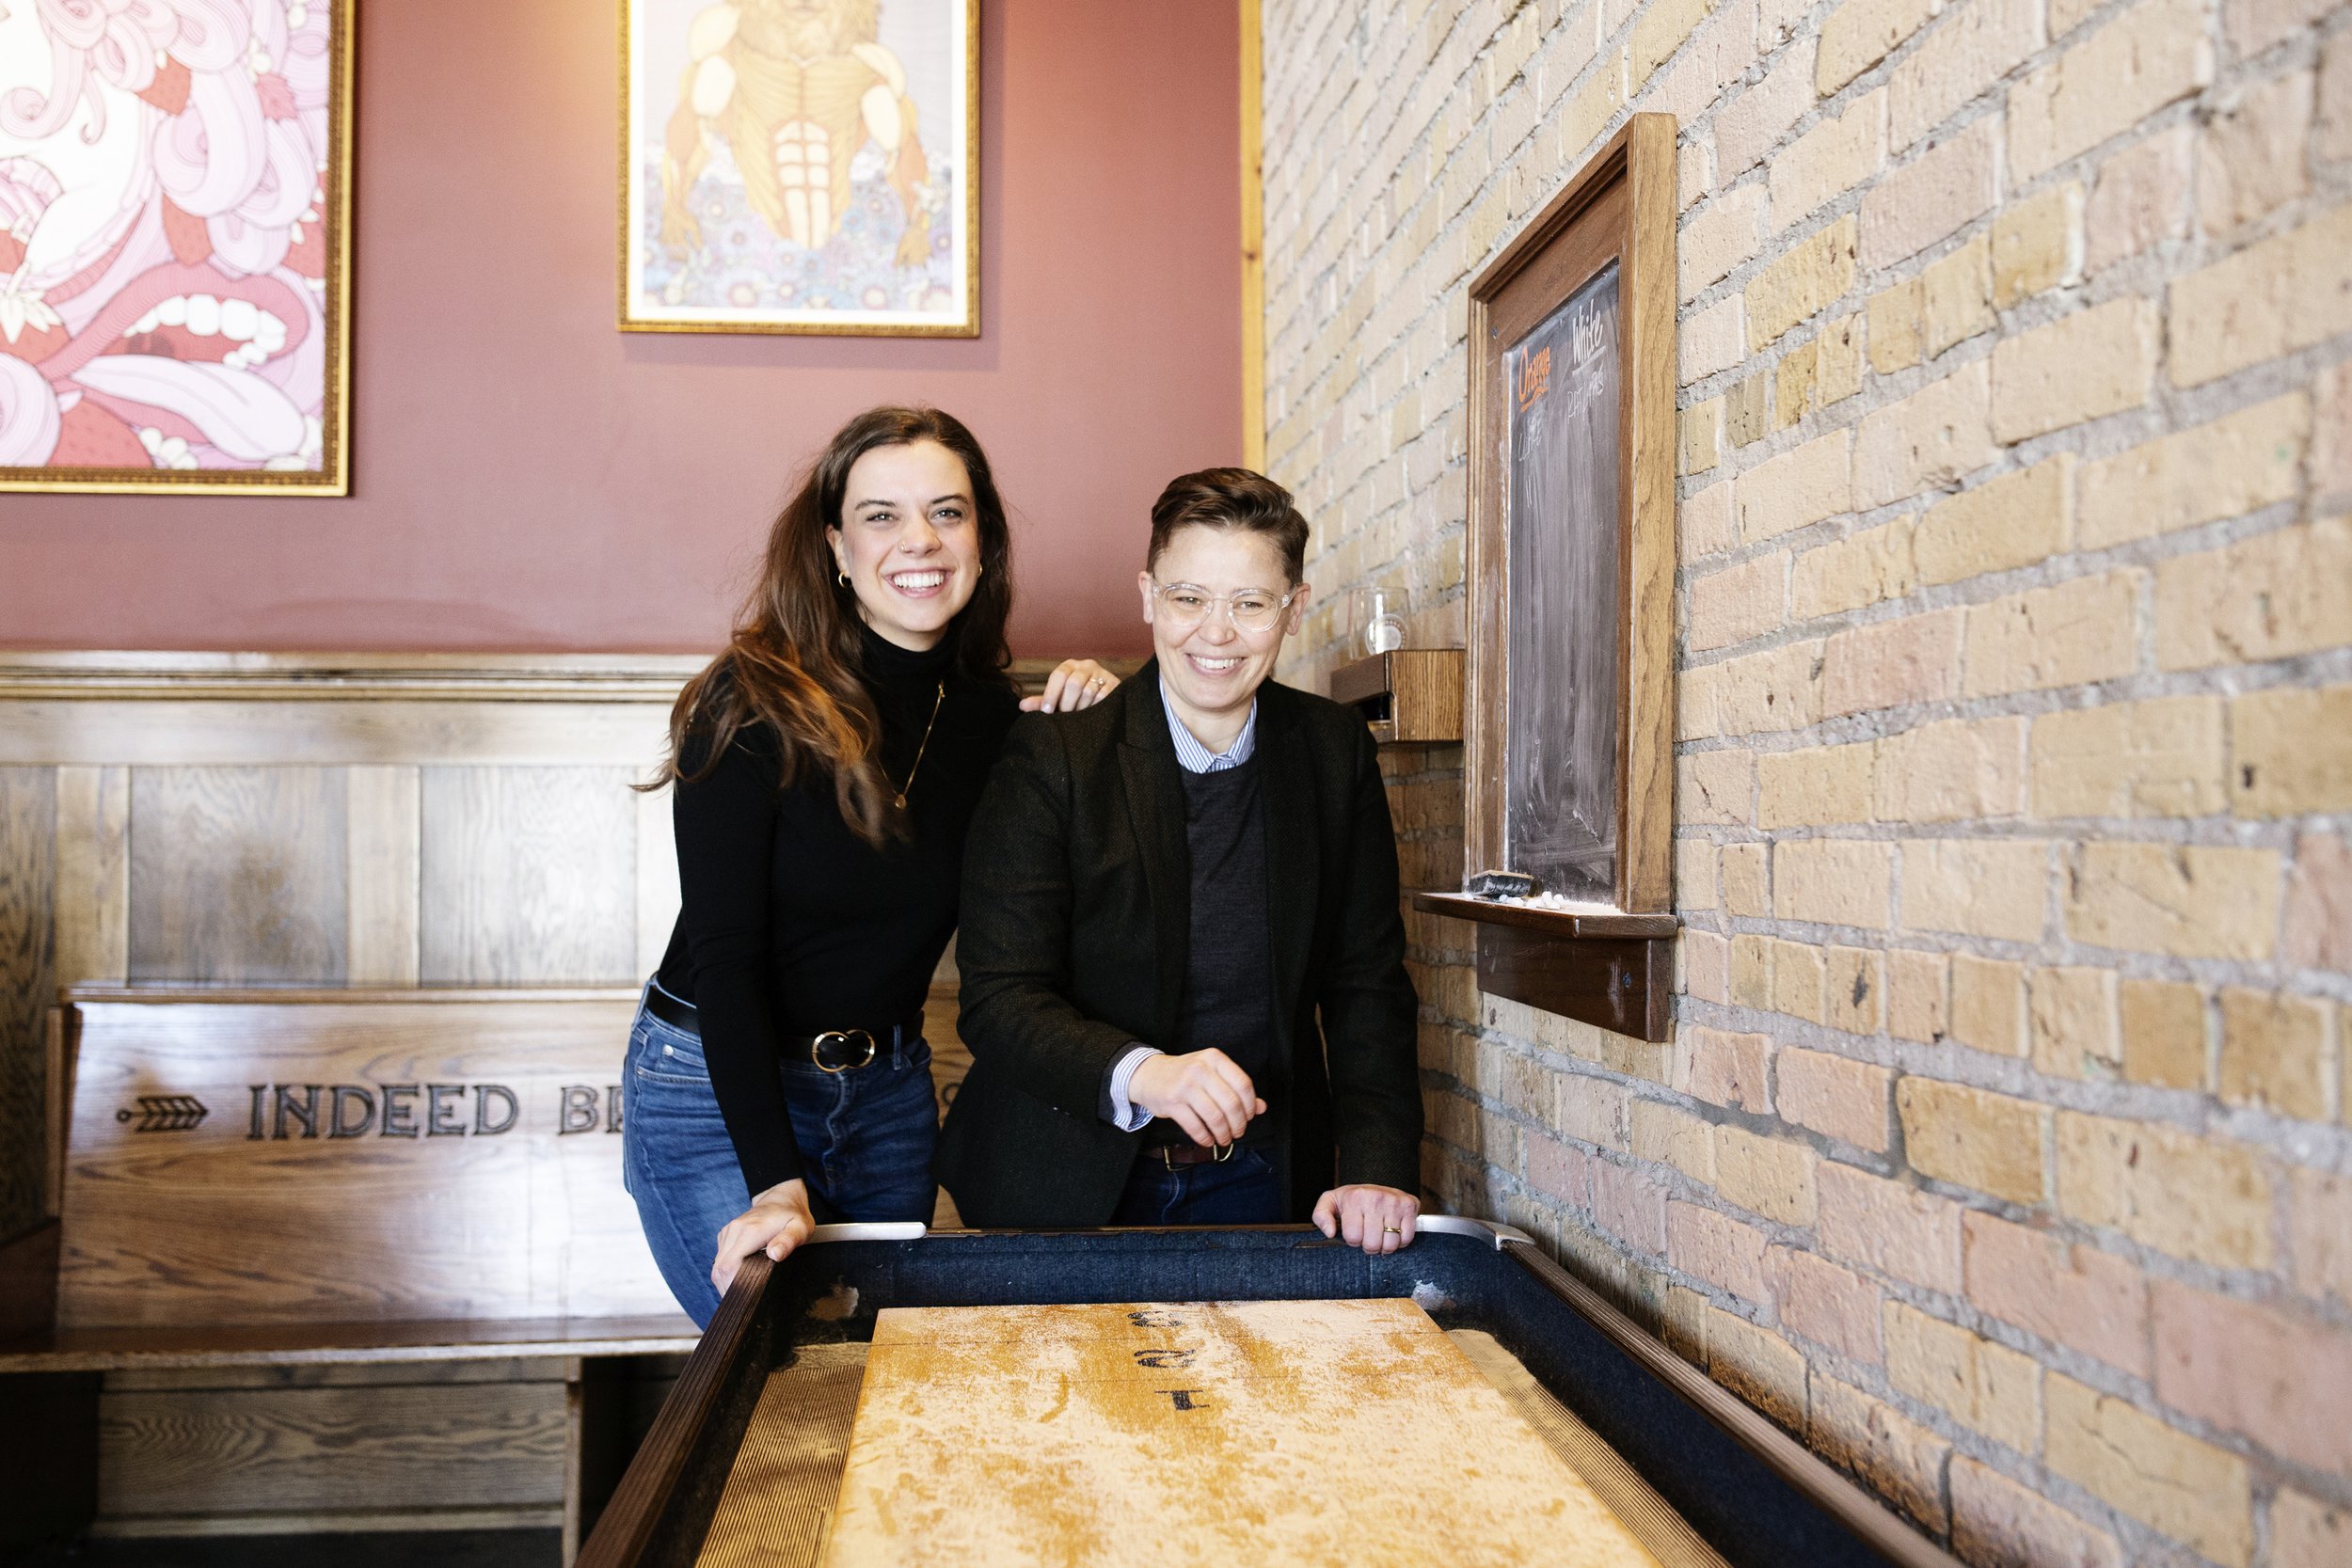 Indeed_Brewery_Engagement _Session_05.JPG